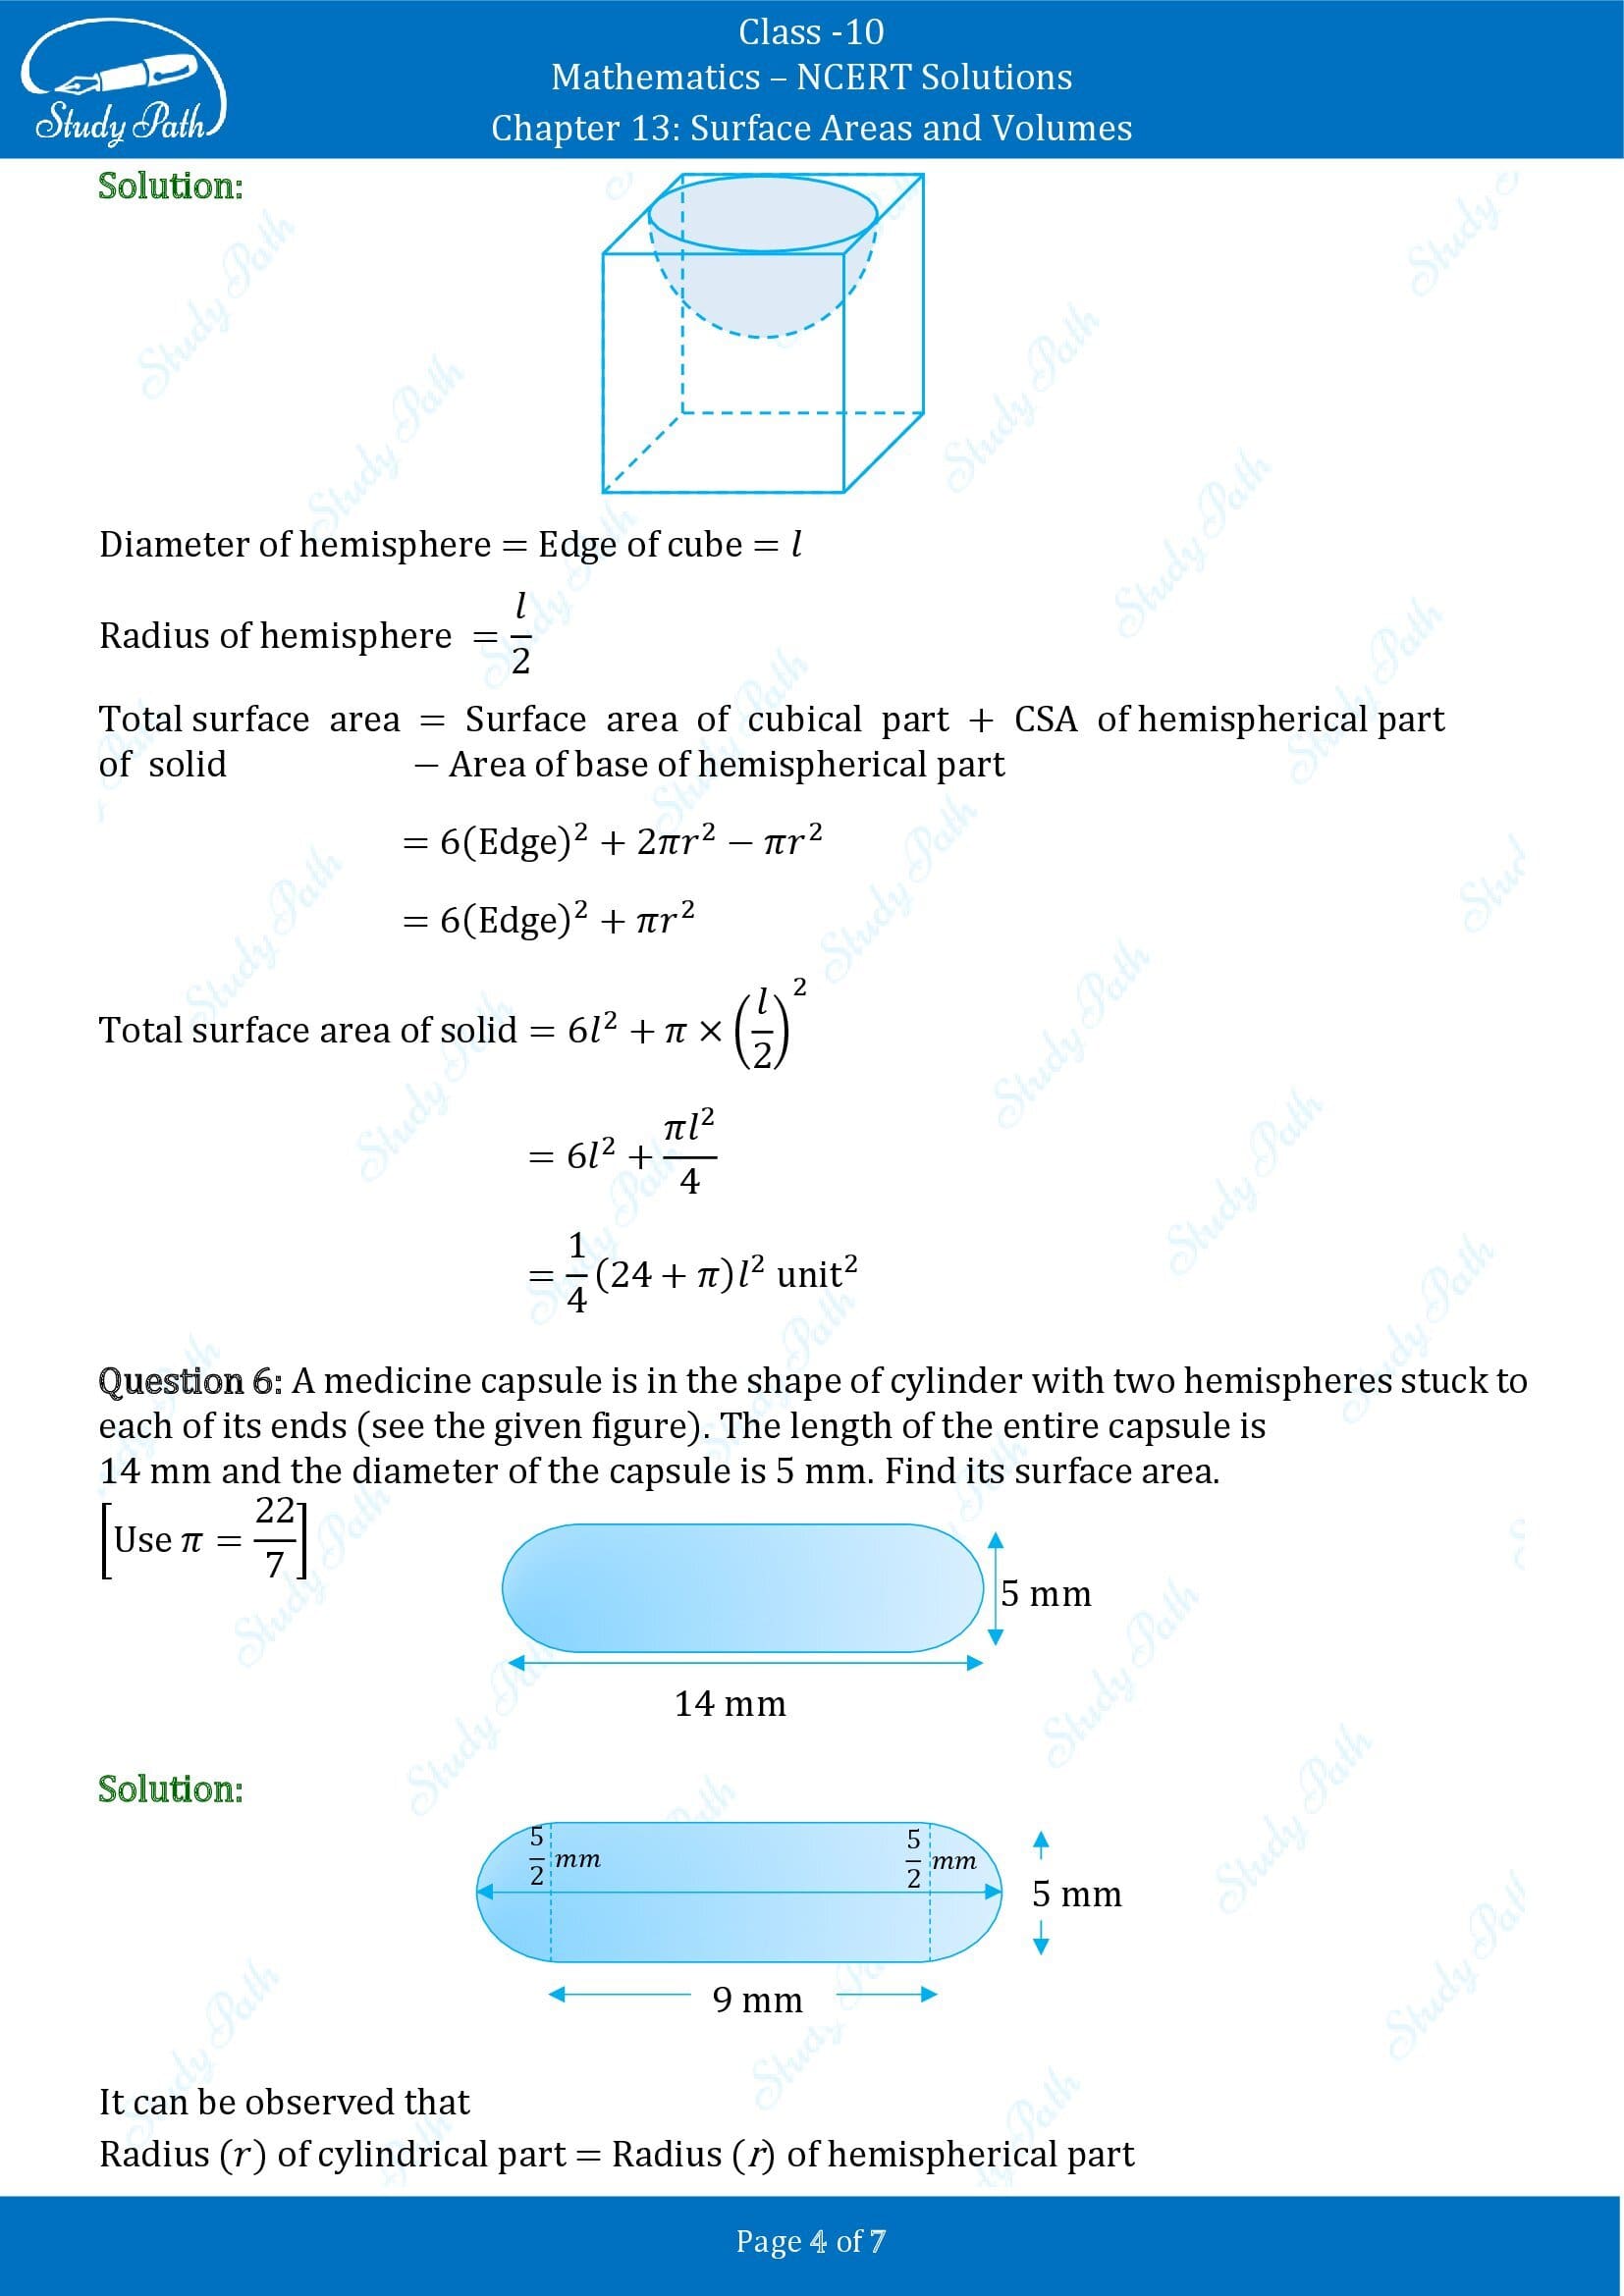 NCERT Solutions for Class 10 Maths Chapter 13 Surface Areas and Volumes Exercise 13.1 00004